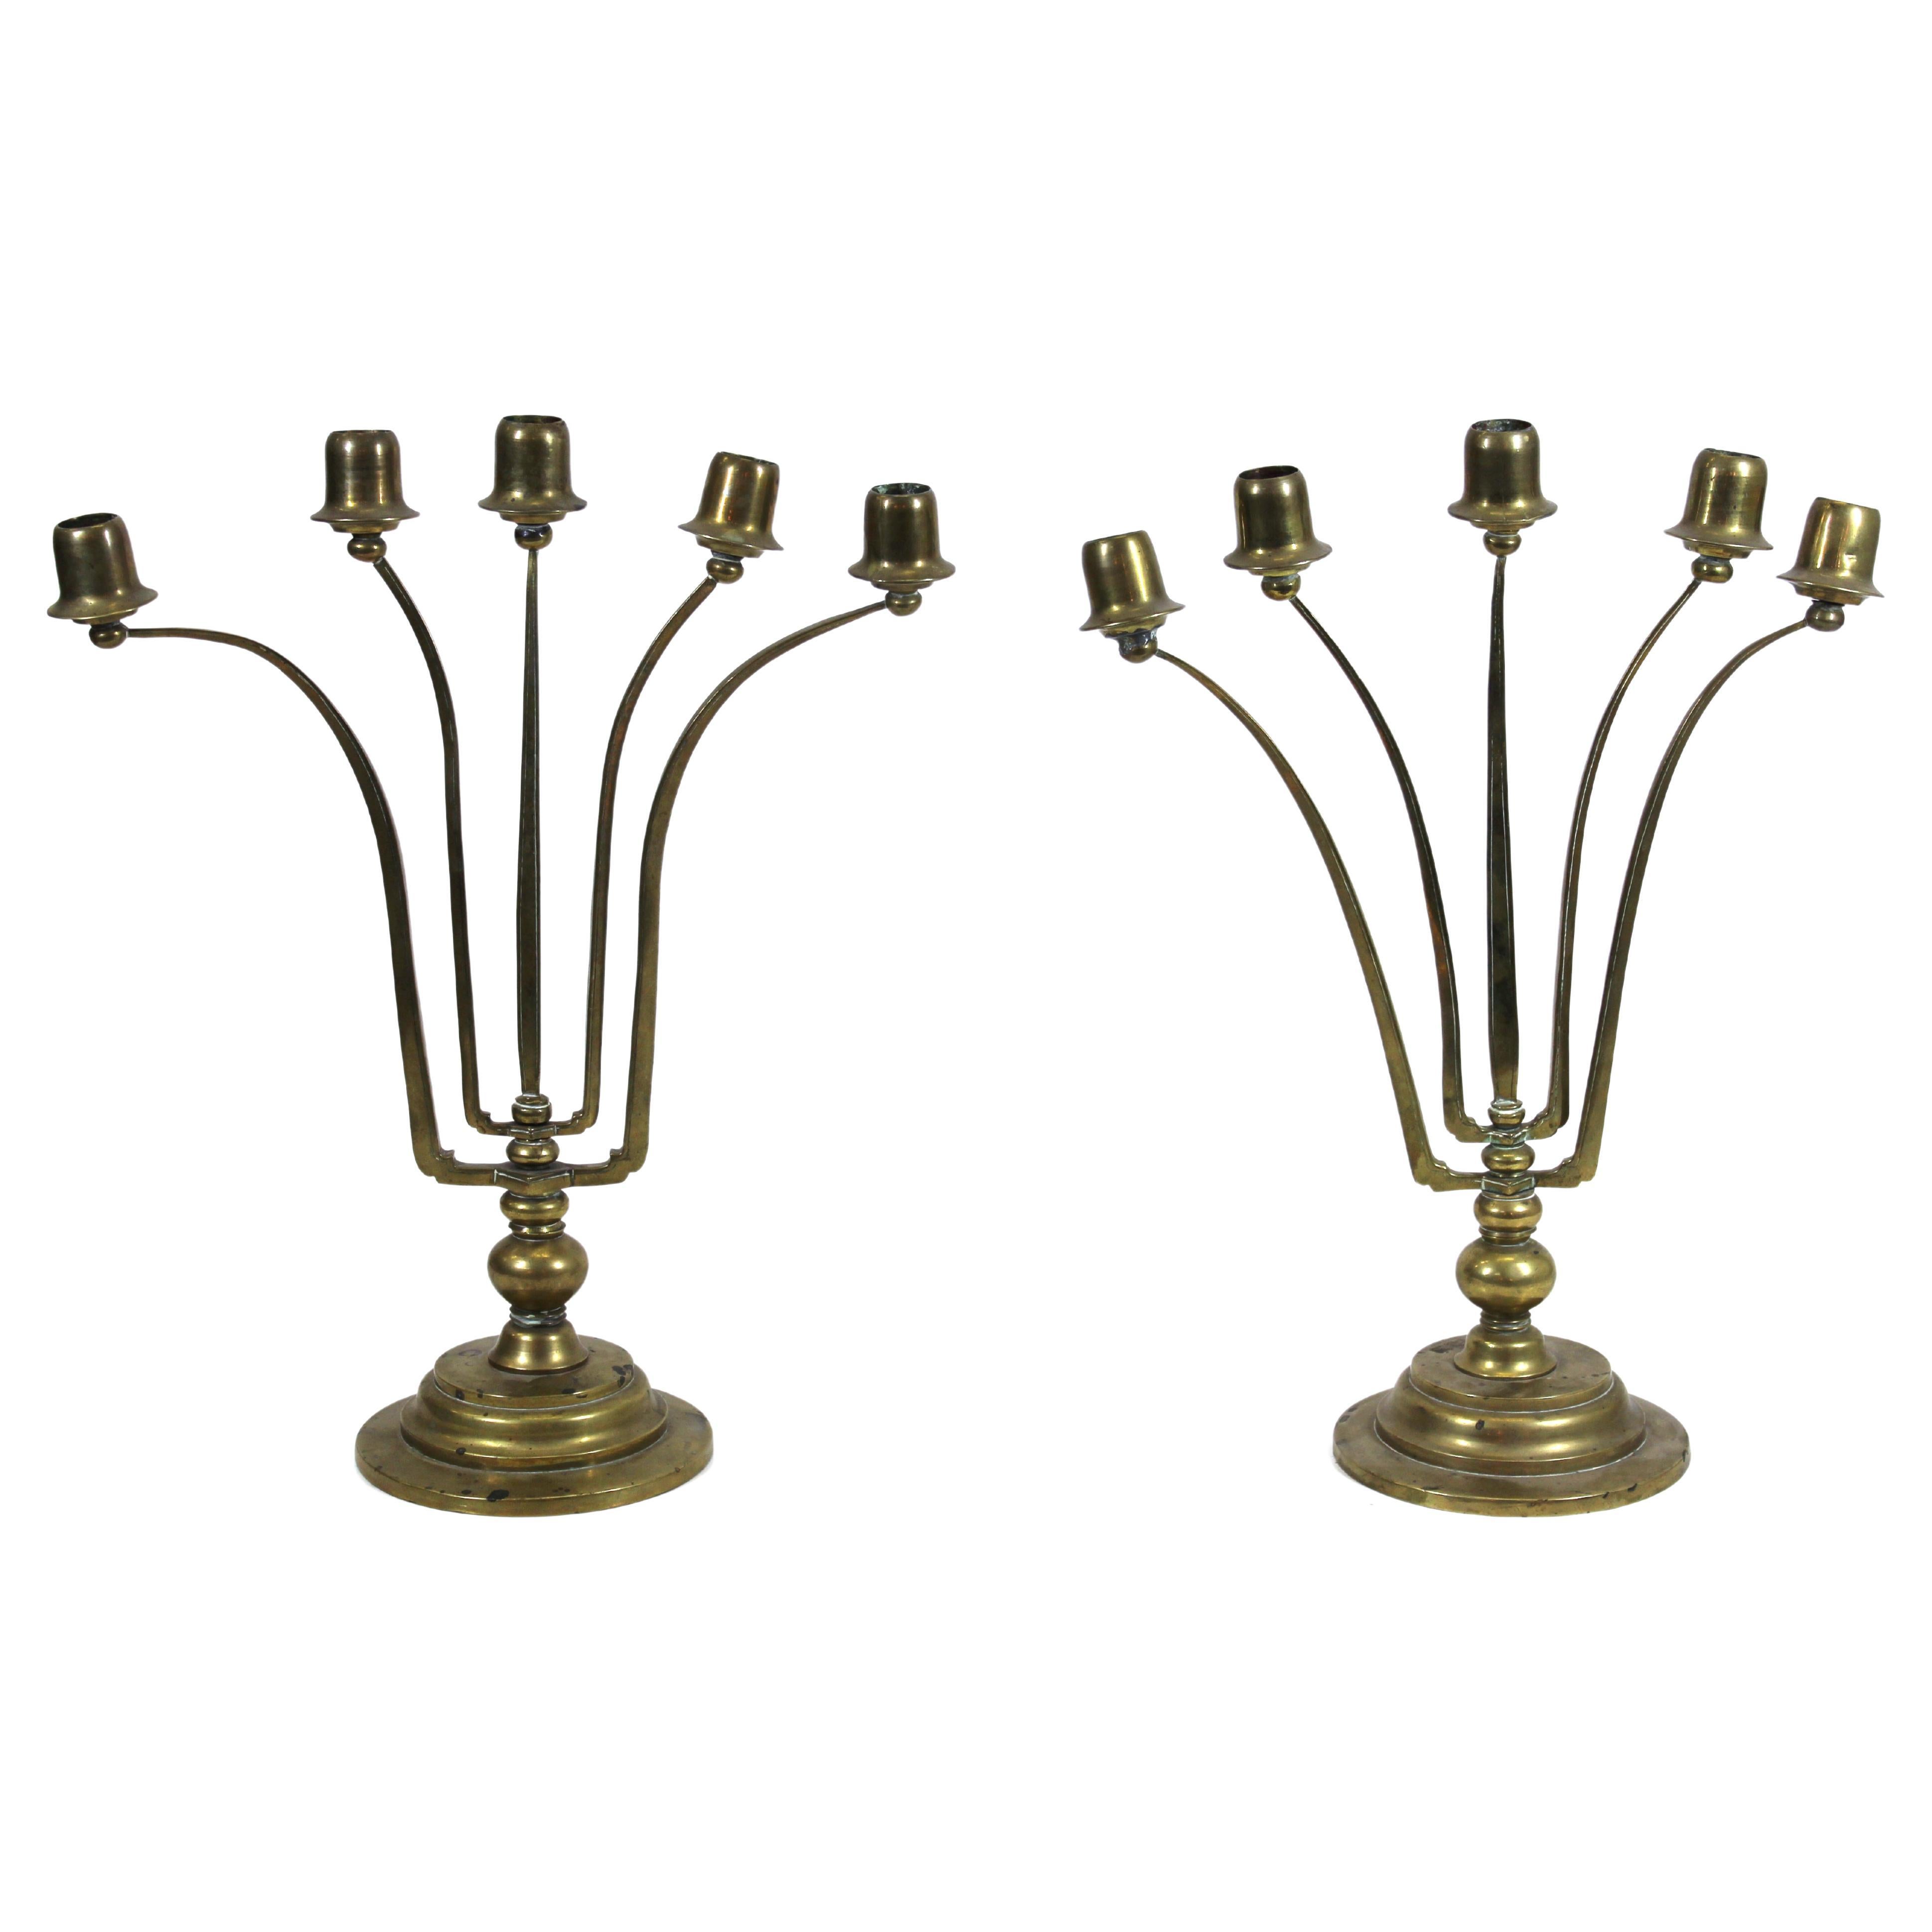 German Early Modernist Peter Behrens Style Candleholders